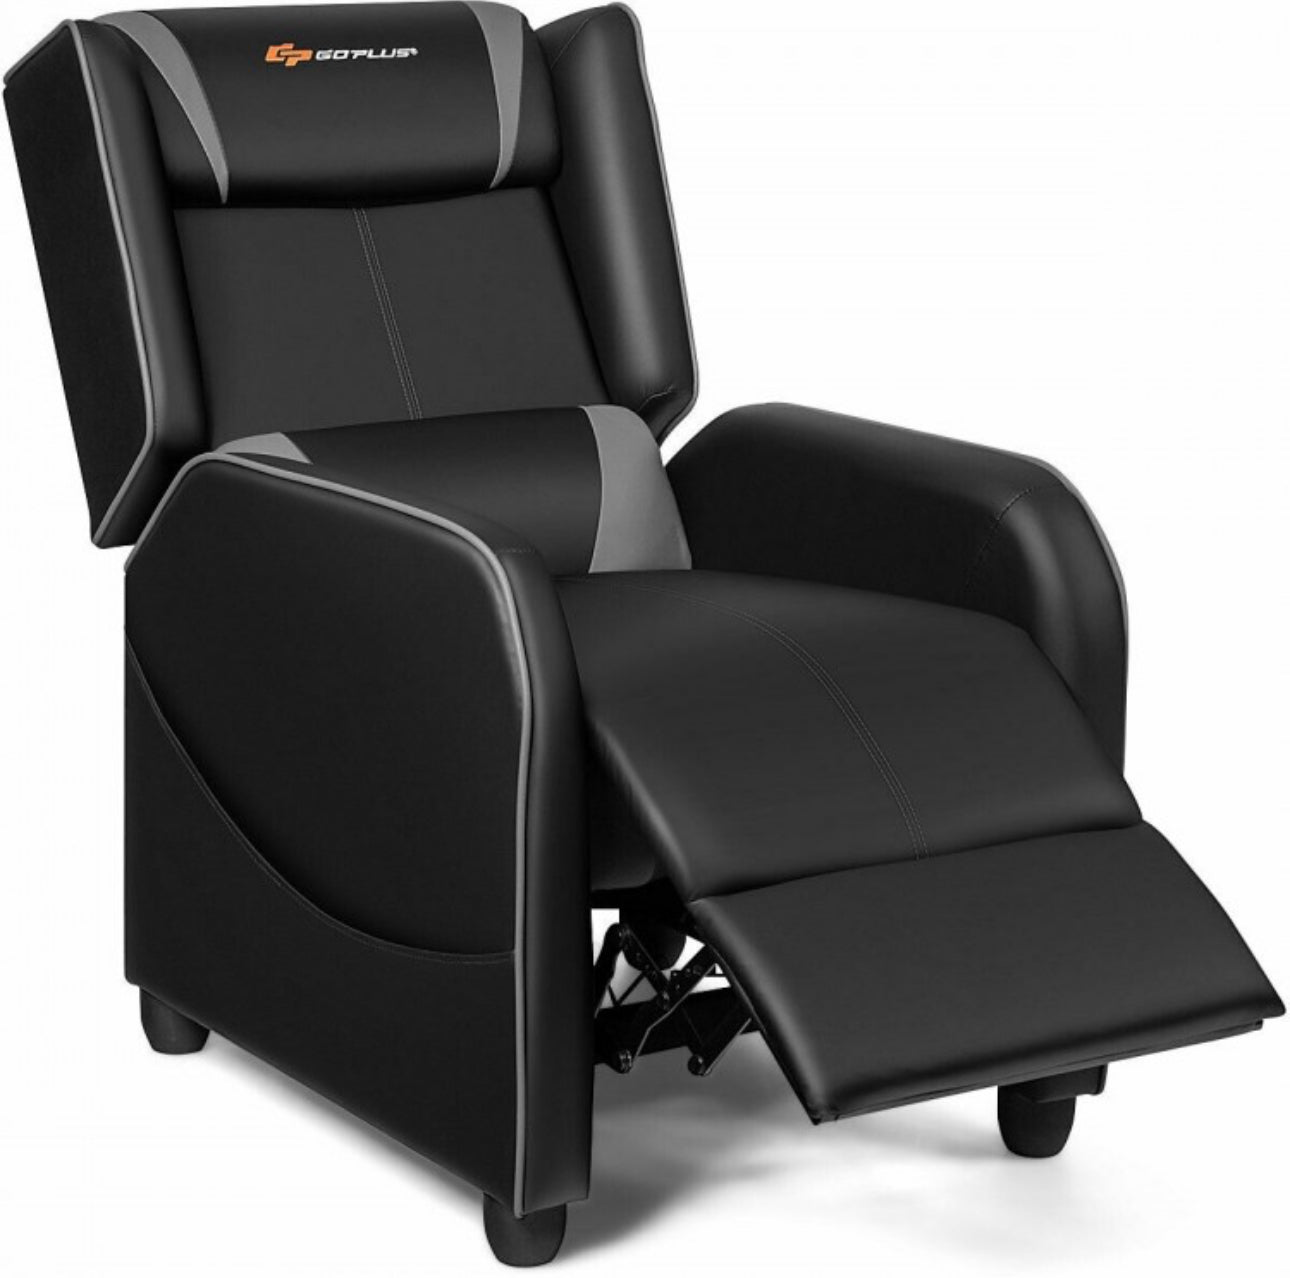 Very Elegant Heavy Duty Comfortable Adjustable Modern Gaming Recliner Chair With Massage Feature & Footrest | Massage Remote